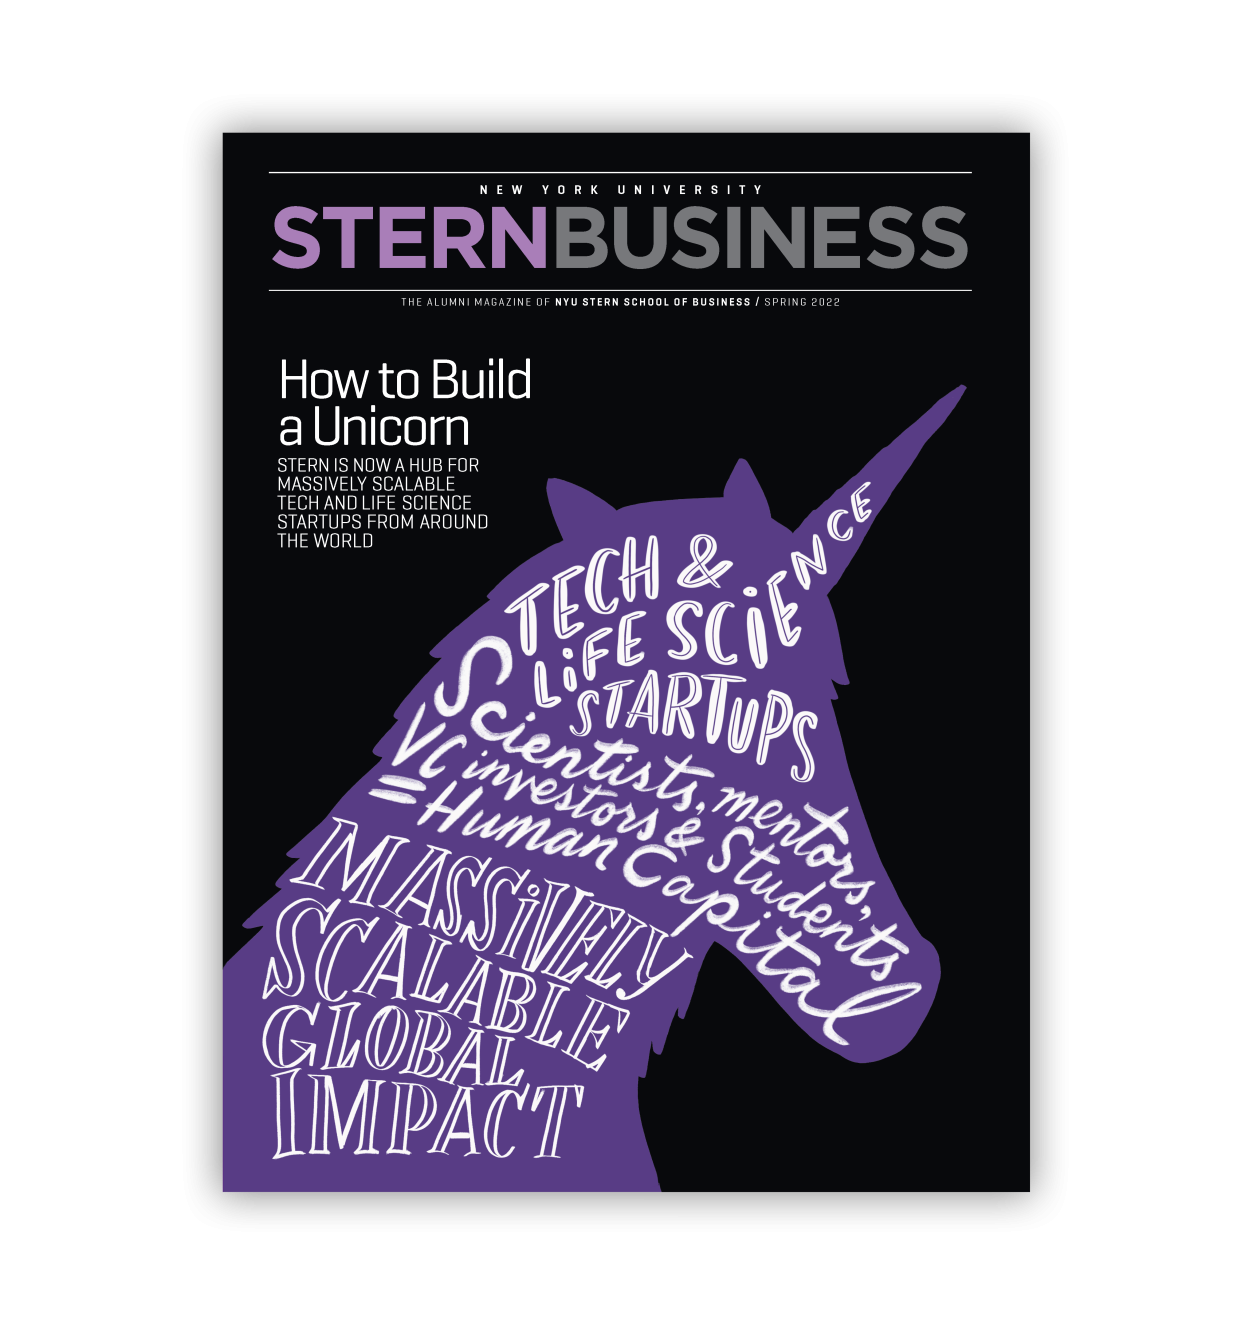 The Fall 2022 cover of Stern Business magazine shows an outline of a purple unicorn with a text overlay